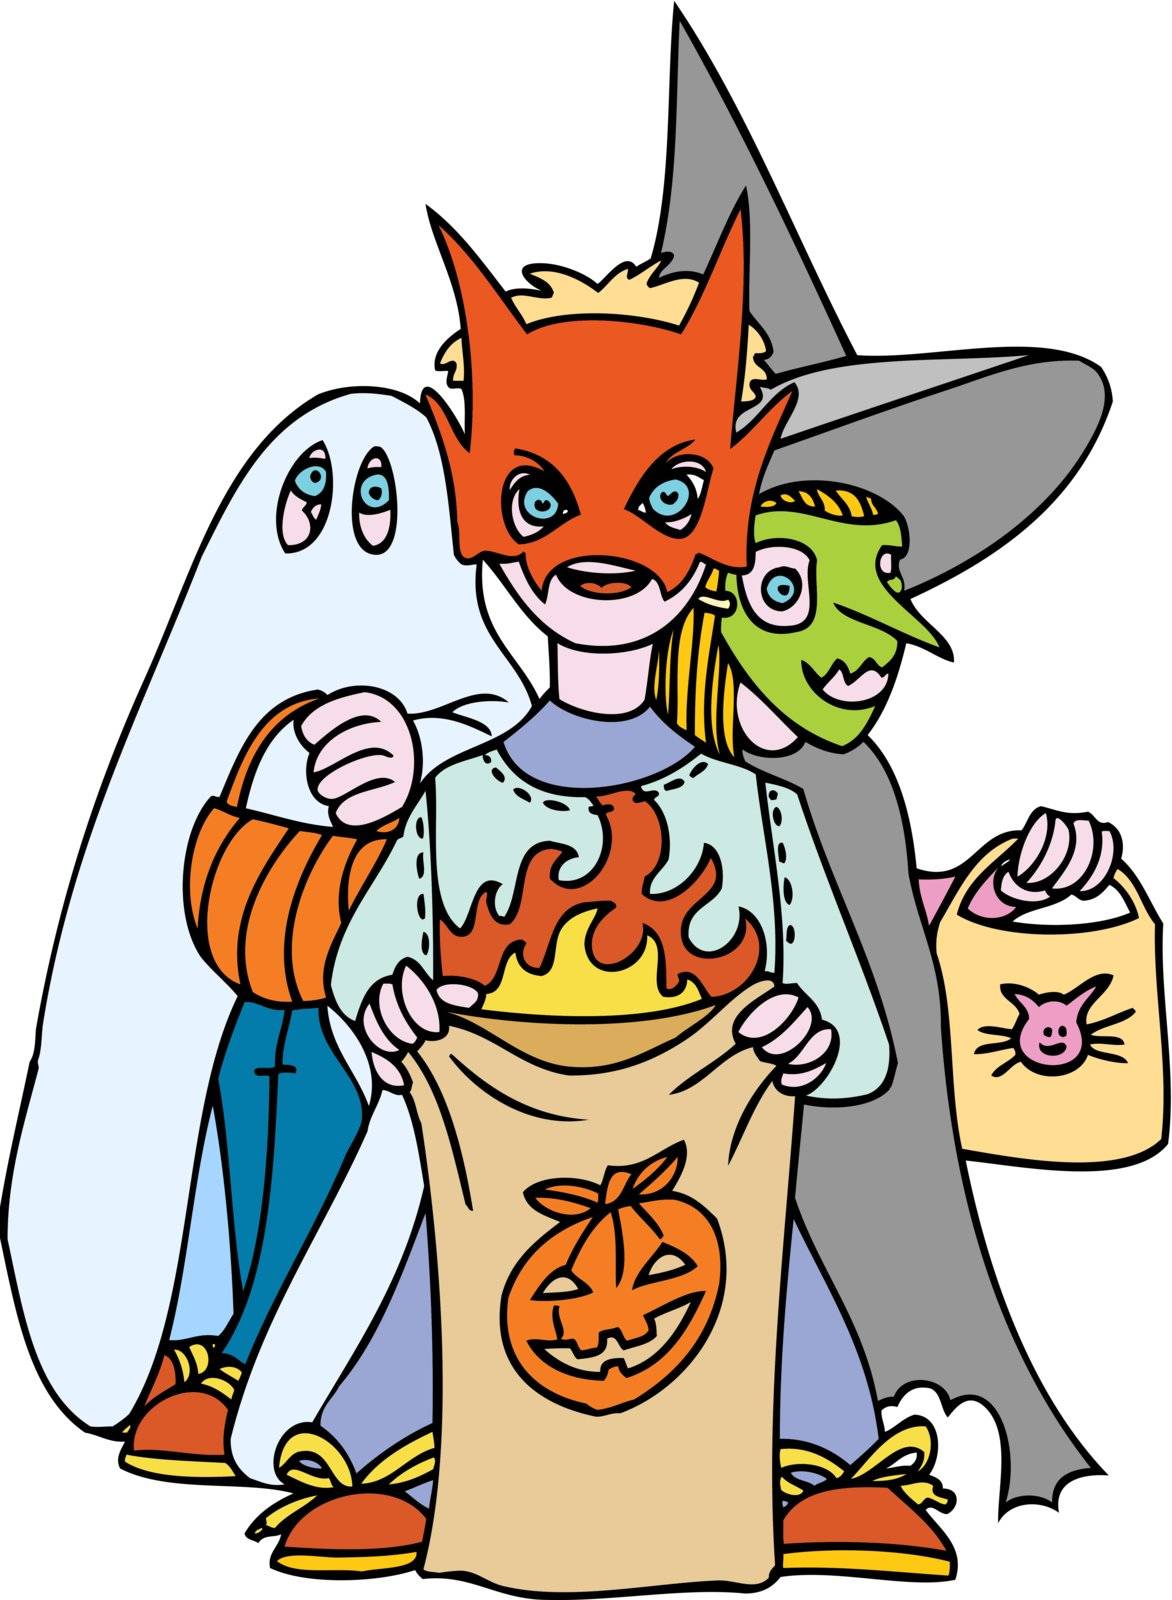 Three kids dressed as a ghost, devil and witch for Halloween.